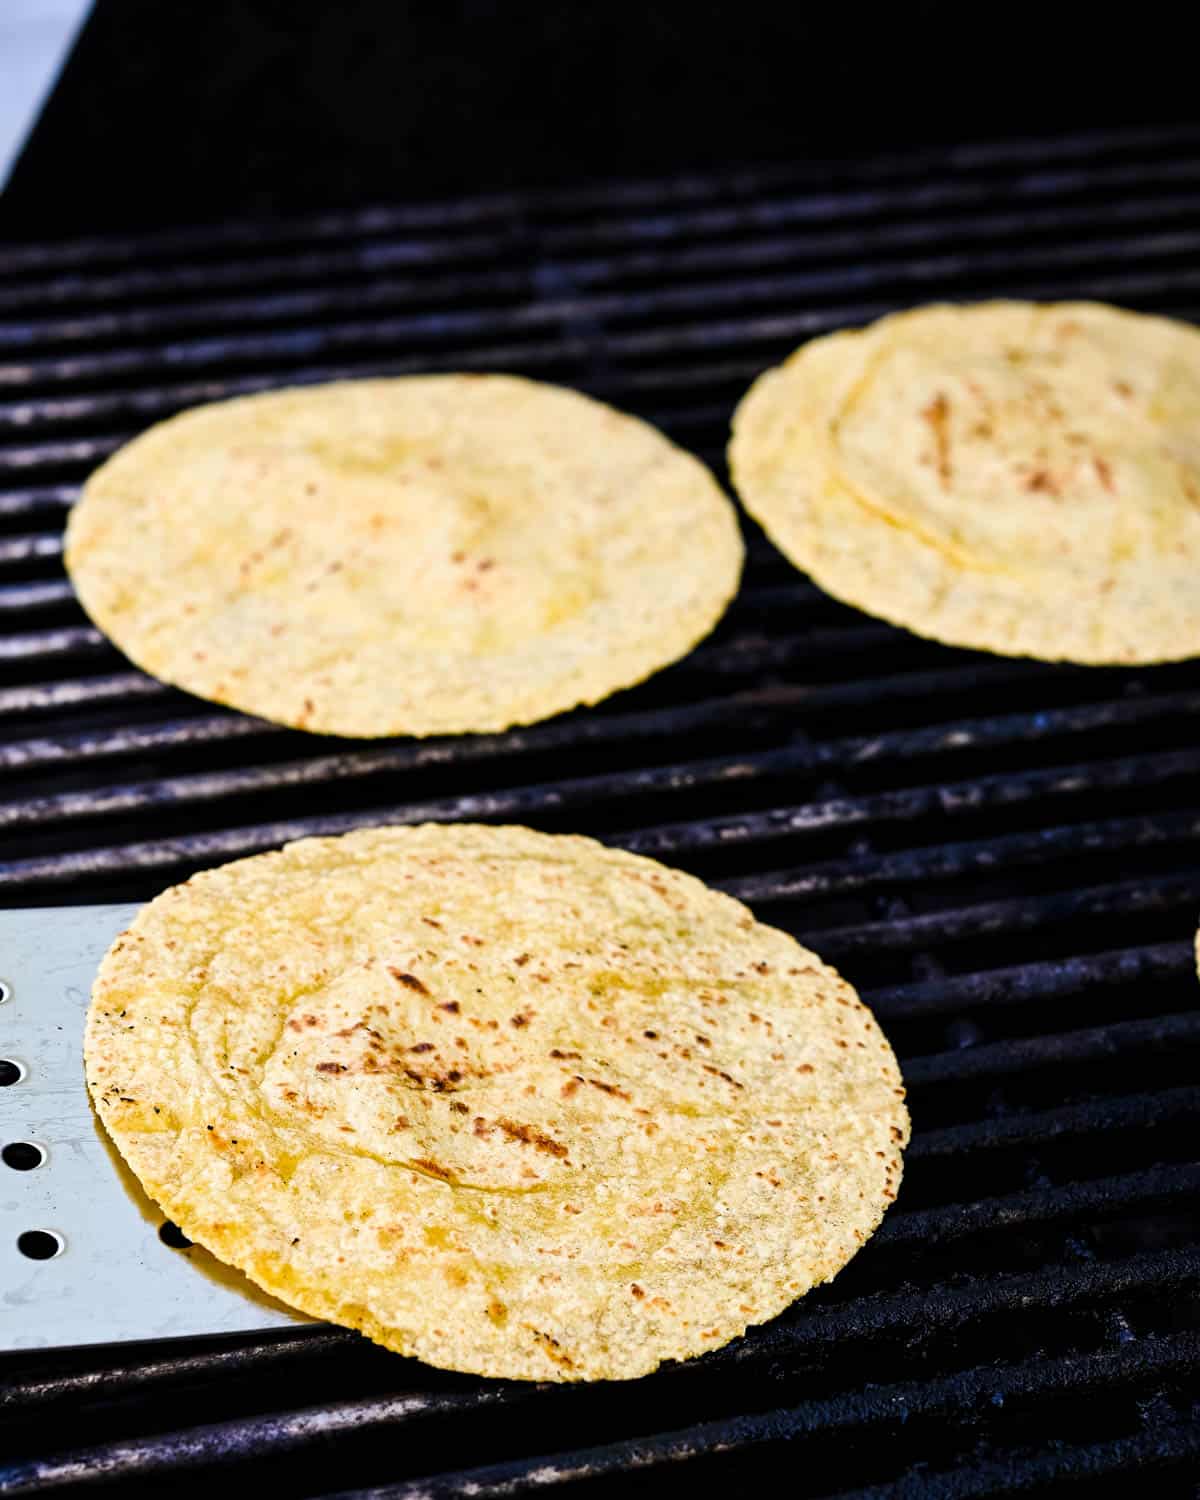 Toasting the corn tortillas on the grill.